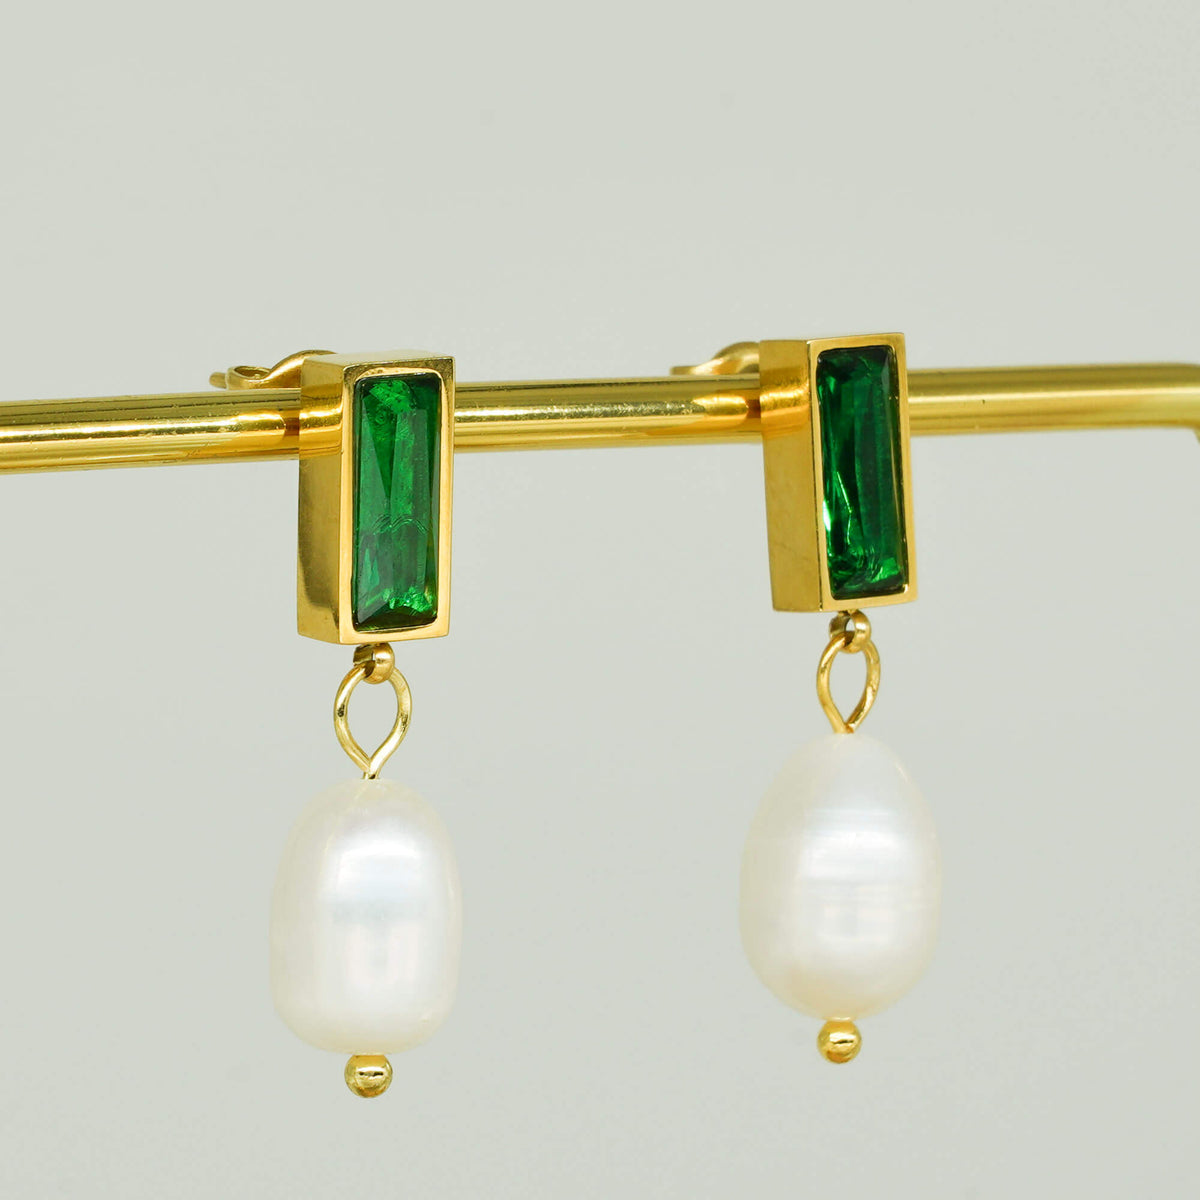 elegant earrings with an emerald stone with a dangling pearl suspended from it.